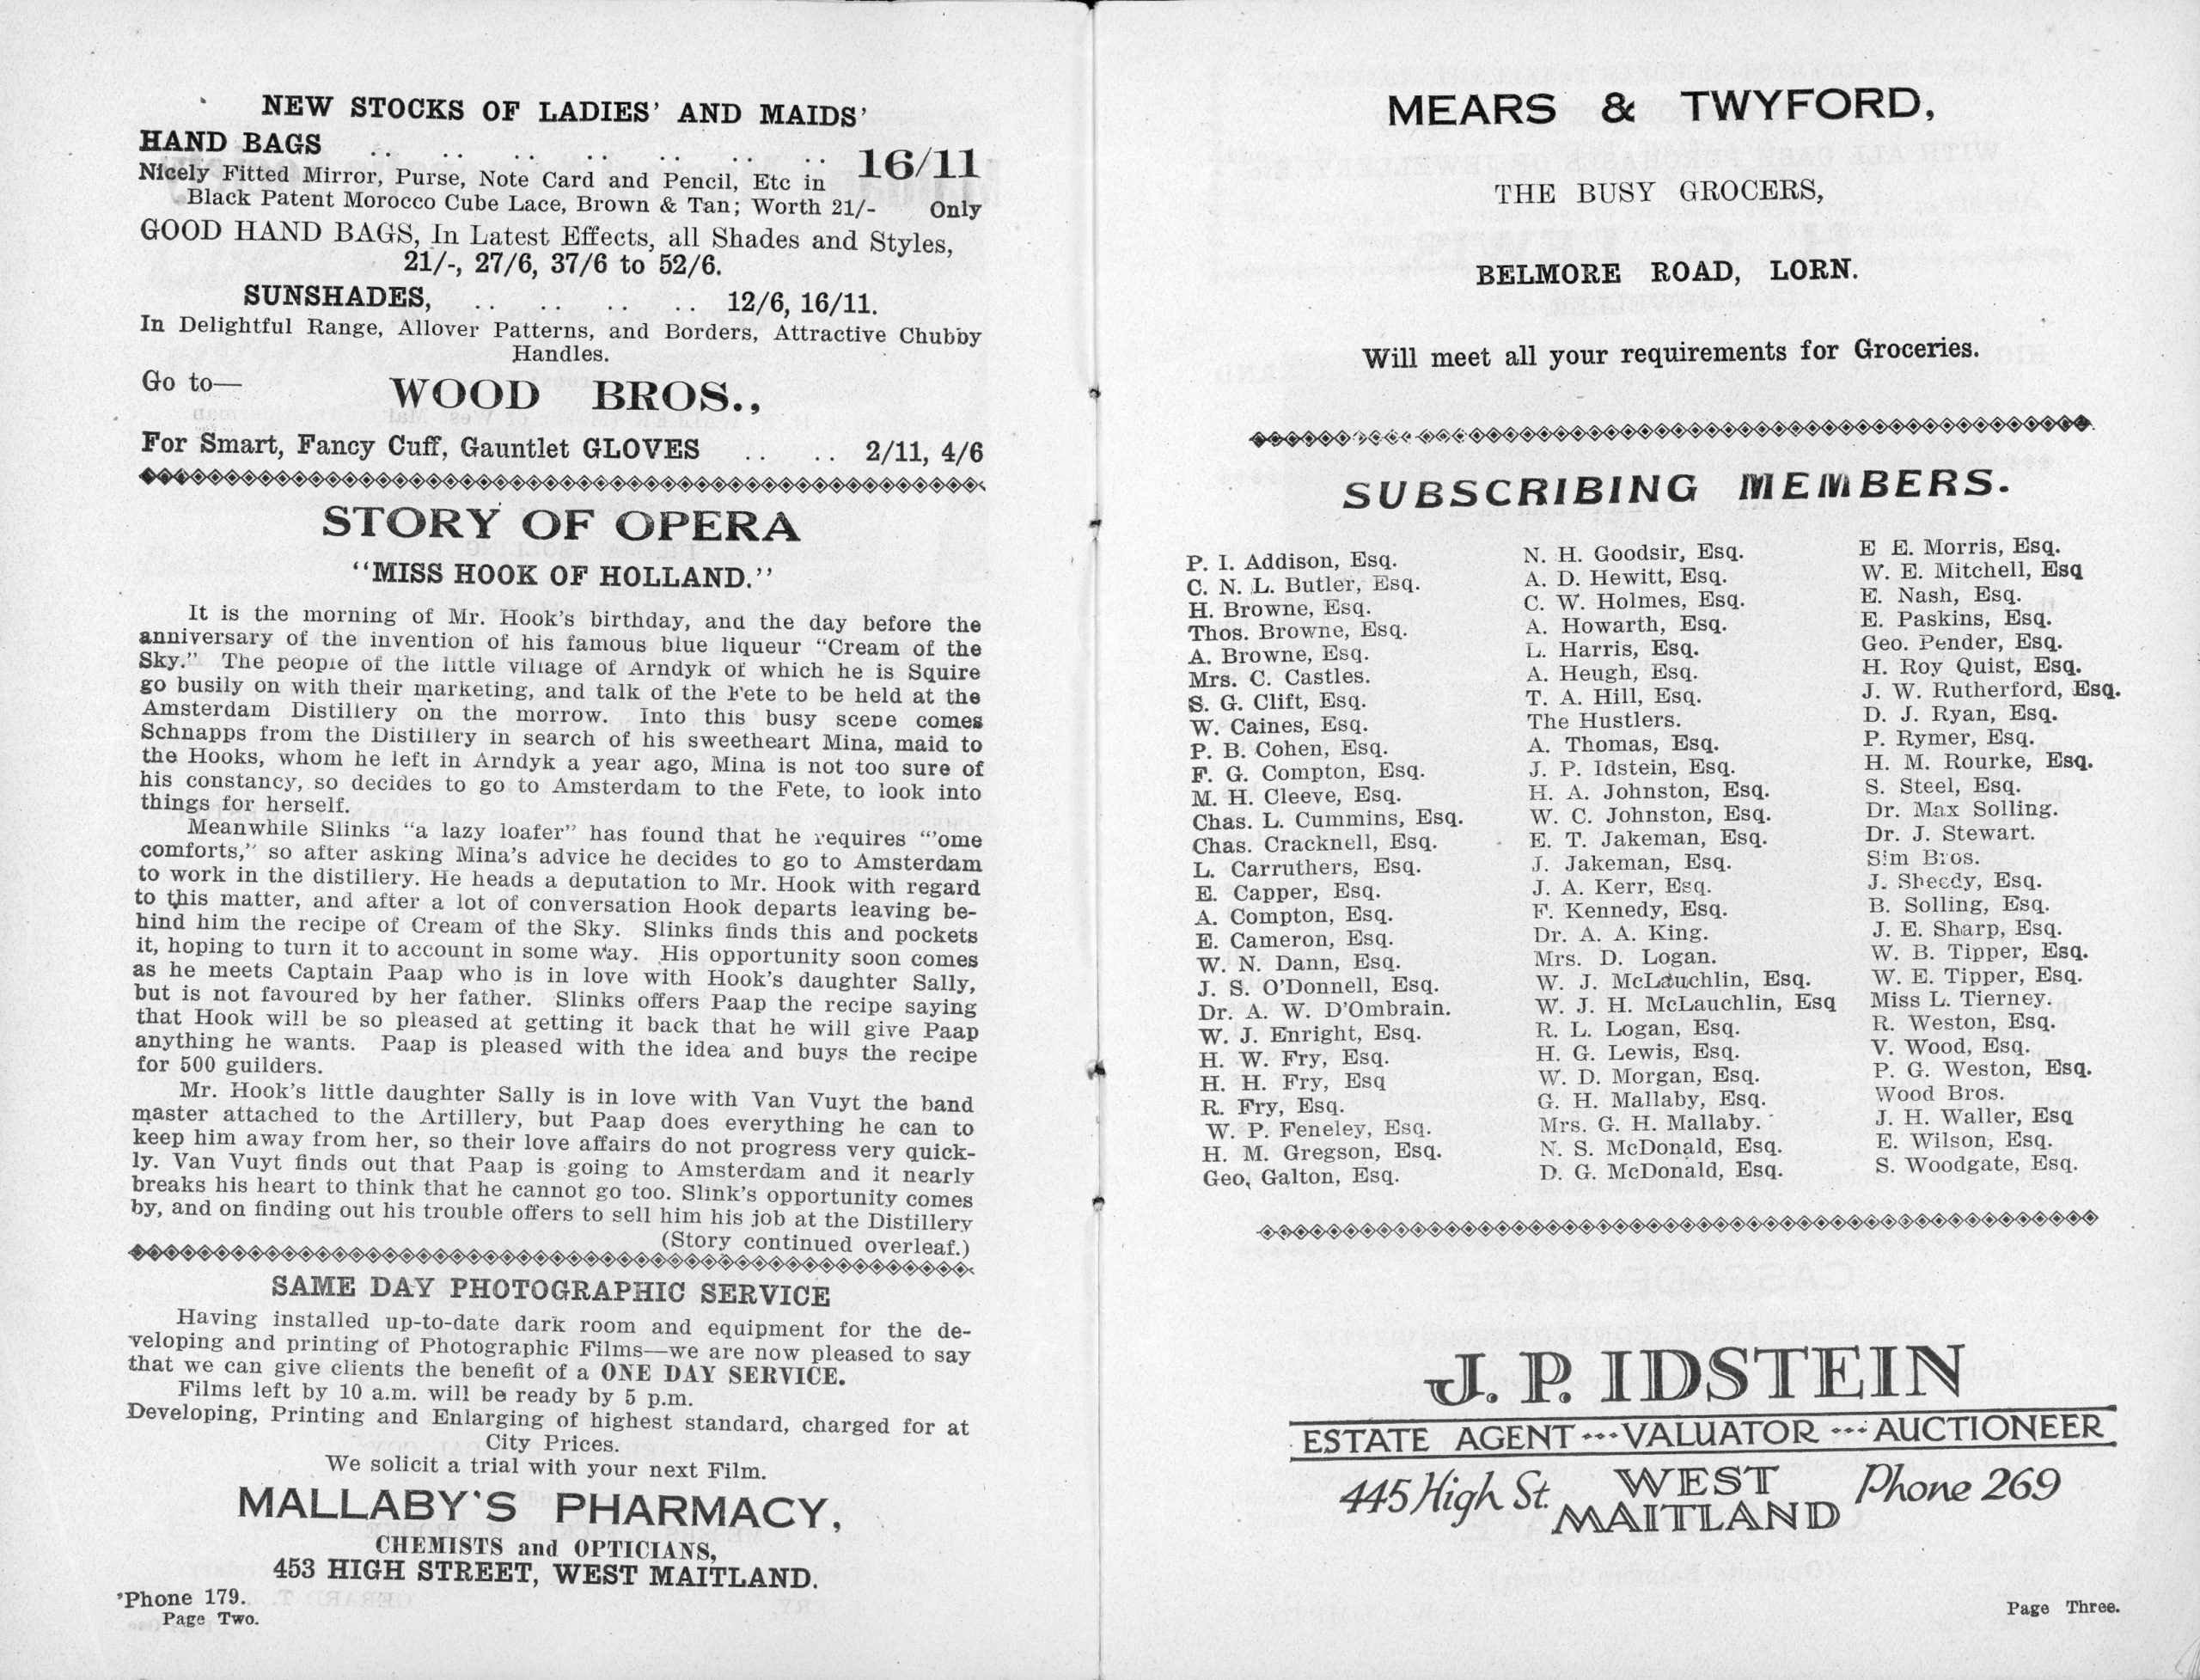 Text advertisements for a real estate agent, pharmacy, and grocer sit around pagea detailing the story of the opera and a list of subscribing members.